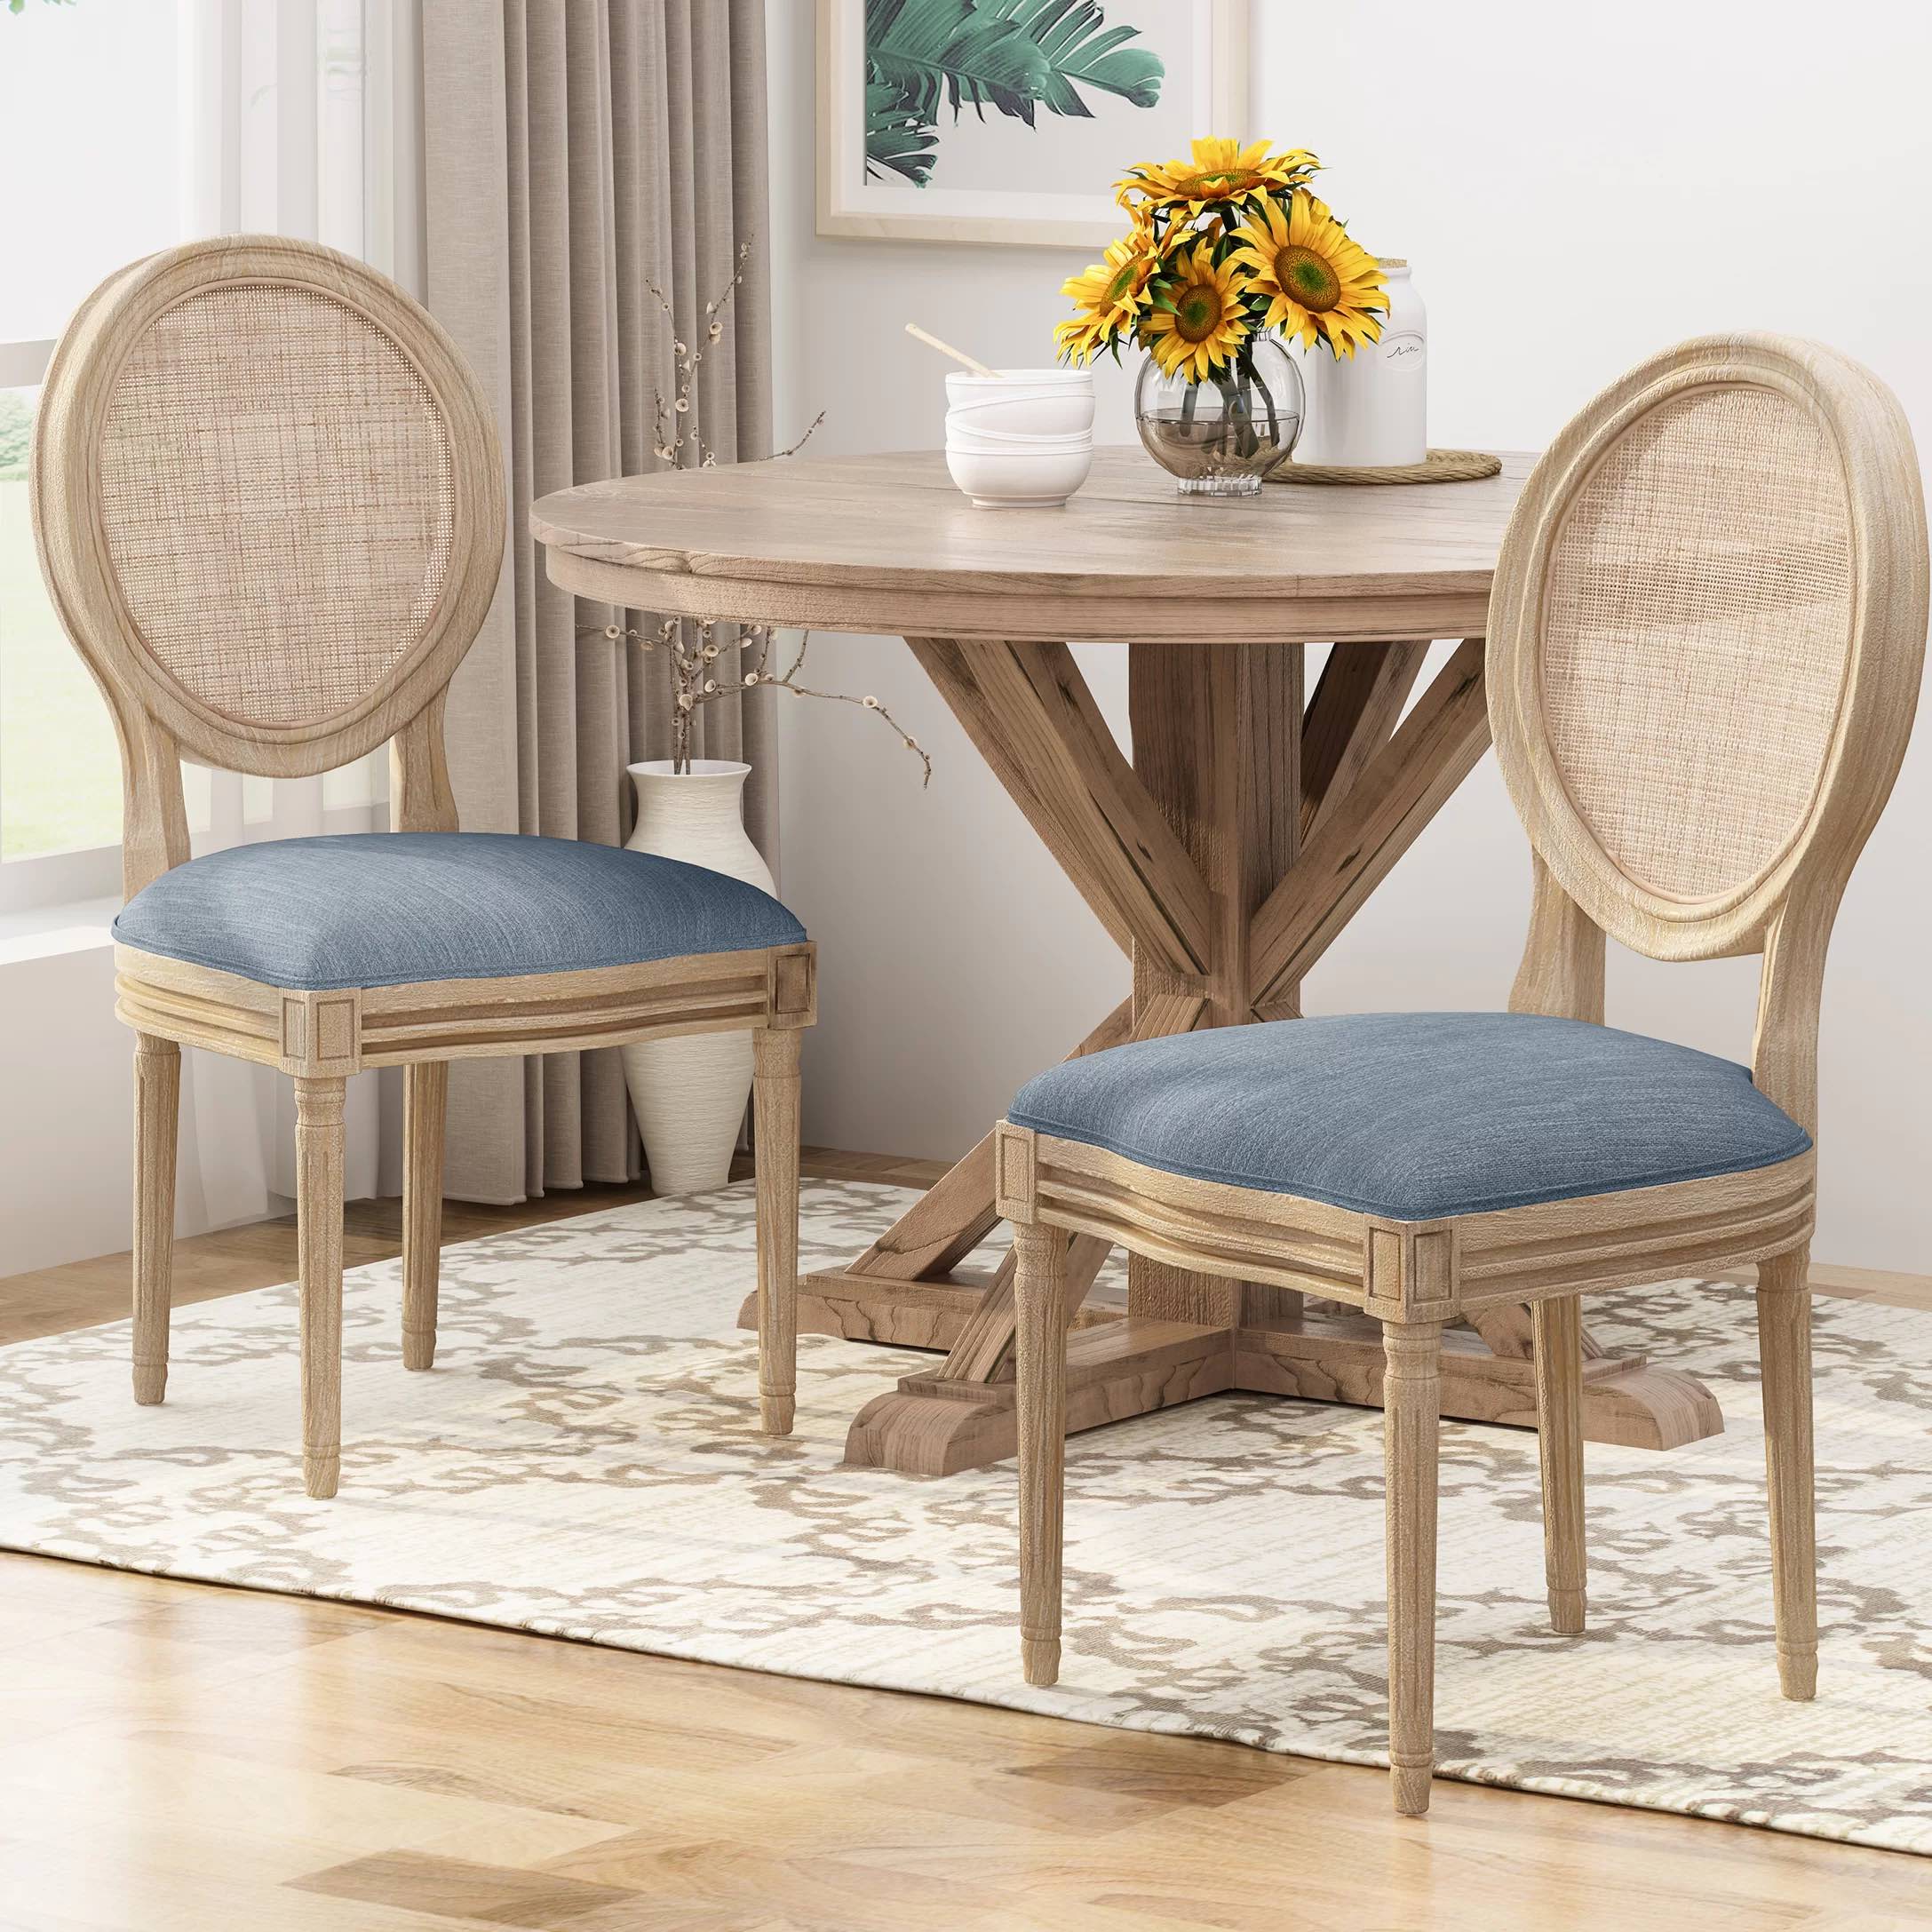 Set of 2 Rodden Dining Chairs